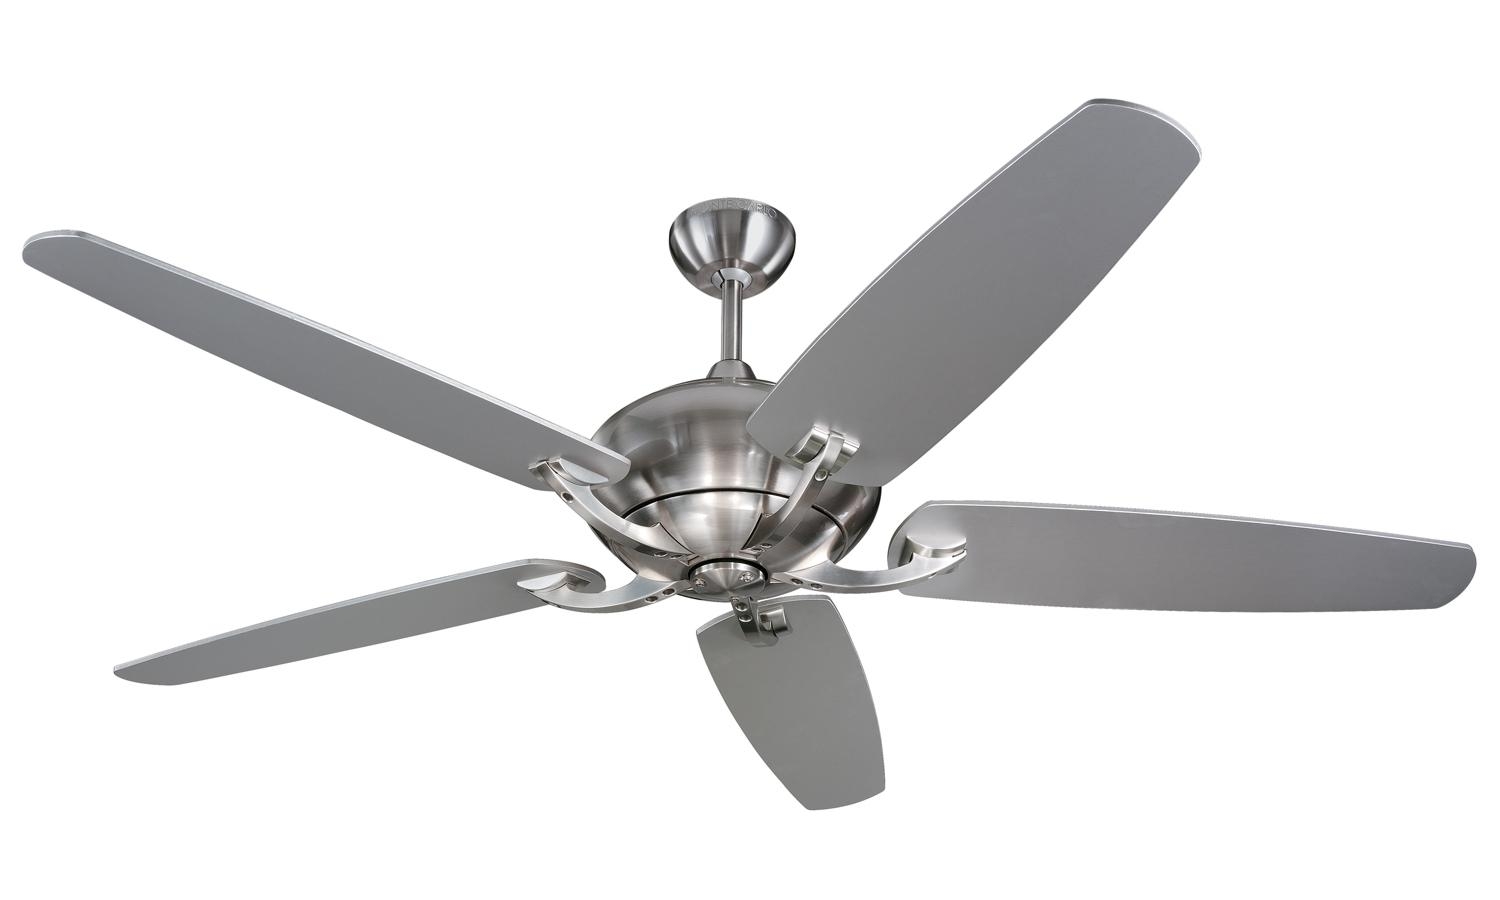 Permalink to Large Ceiling Fan Without Light